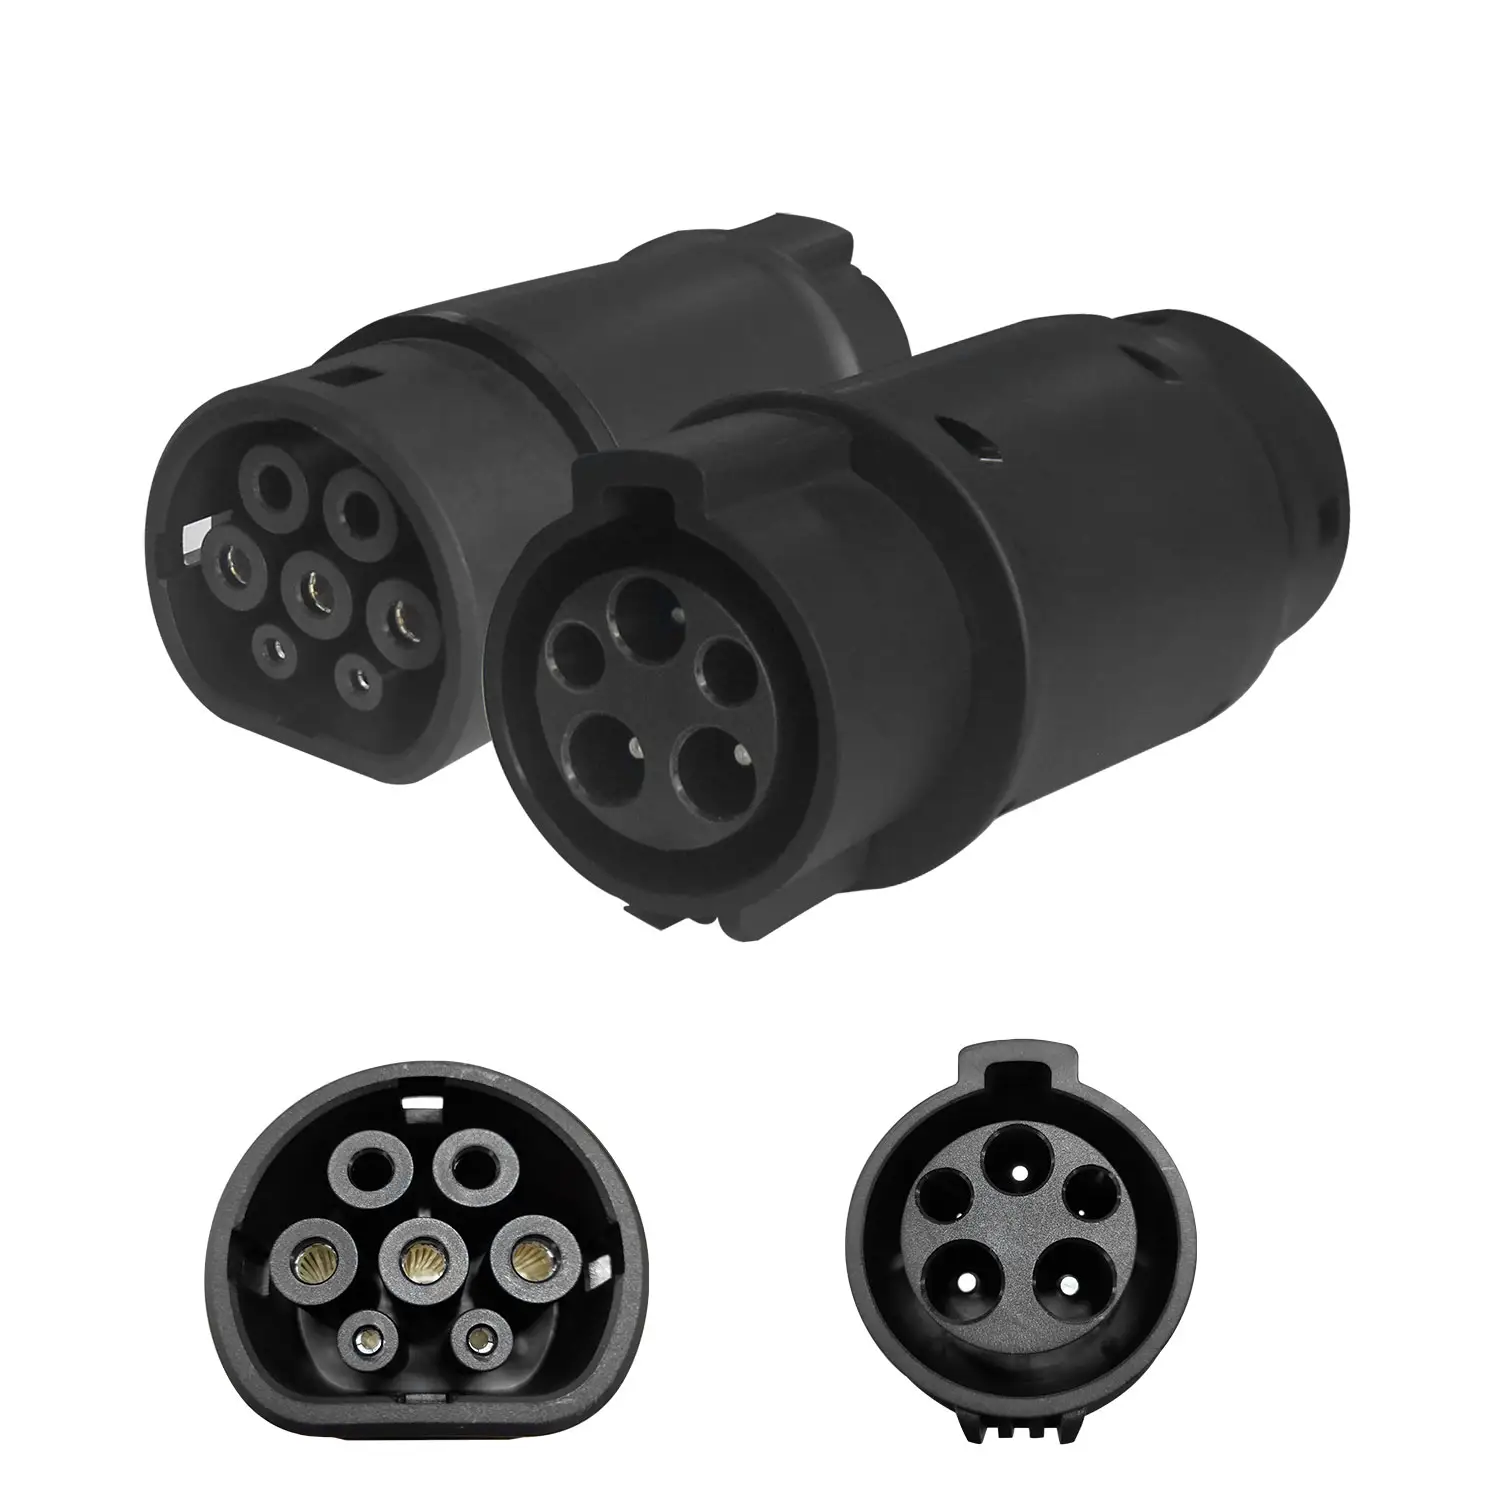 4mm Banana Plug Connectors Adapter Speaker Type 1 to type 2 adapter Video Color Approx Origin Gender Type Male Inch